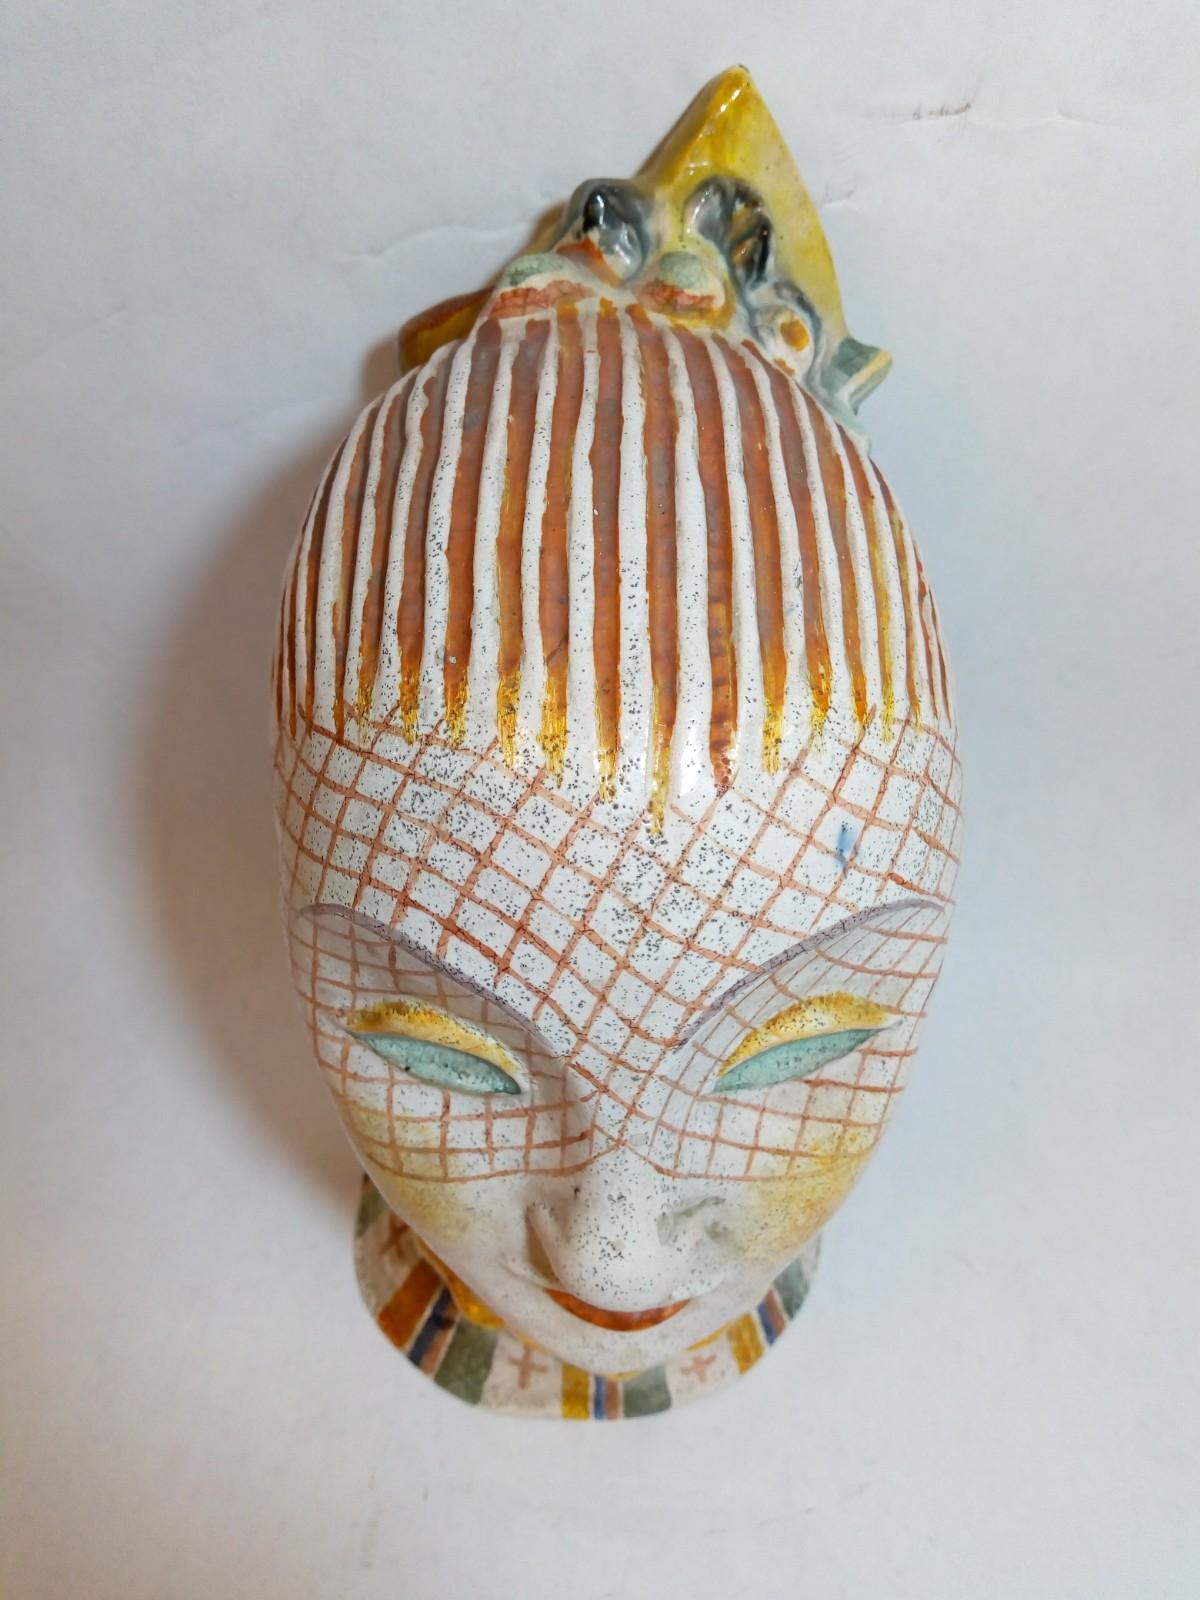 Early 20th Century Glazed Ceramic Head of Woman with Painted Veil, Attributed to Vally Wieselthiel